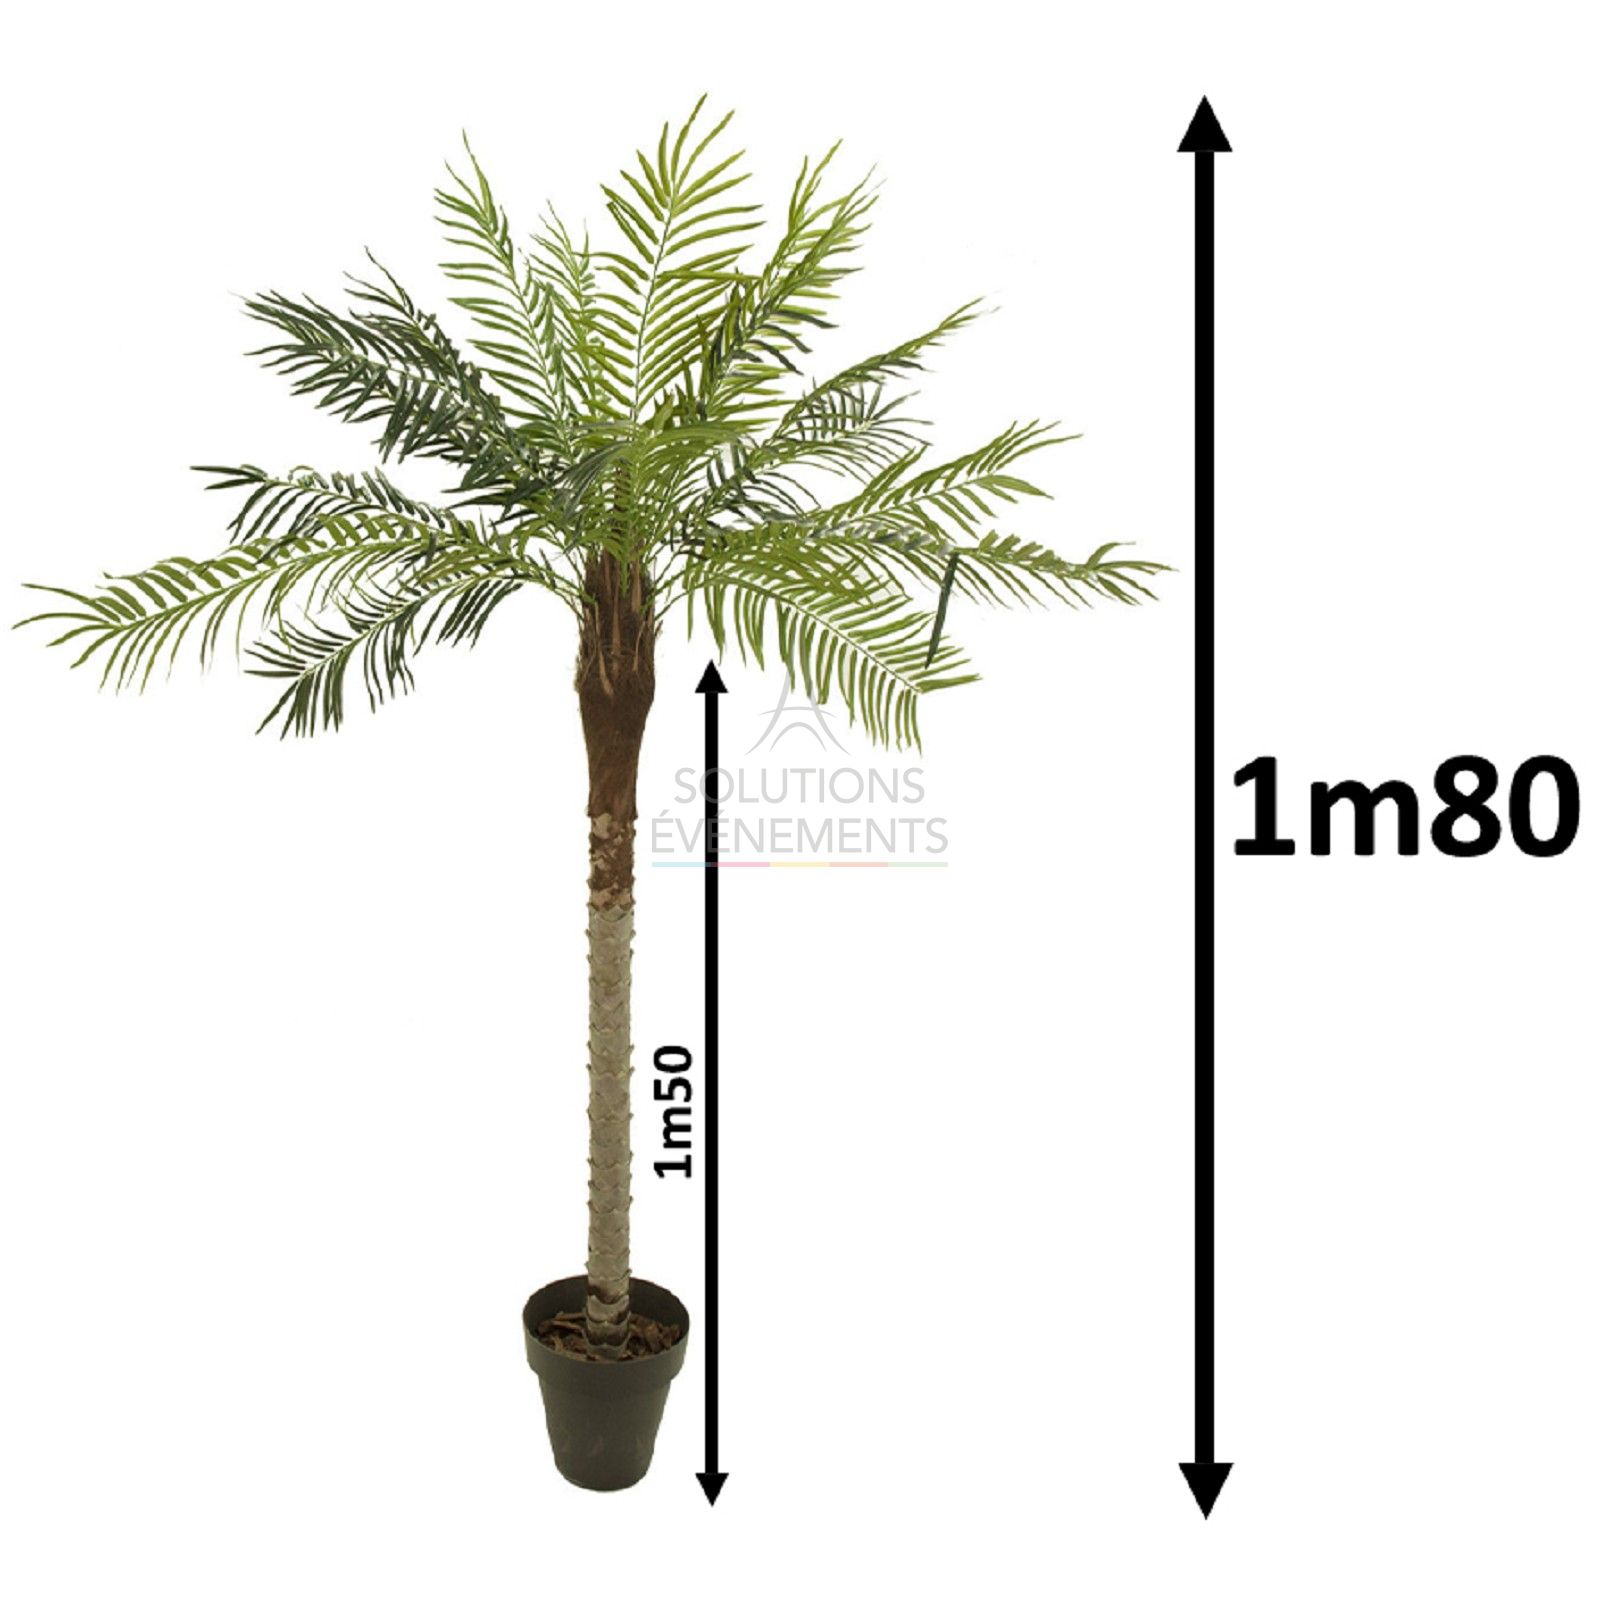 Rental of palm trees with a height of 1m80